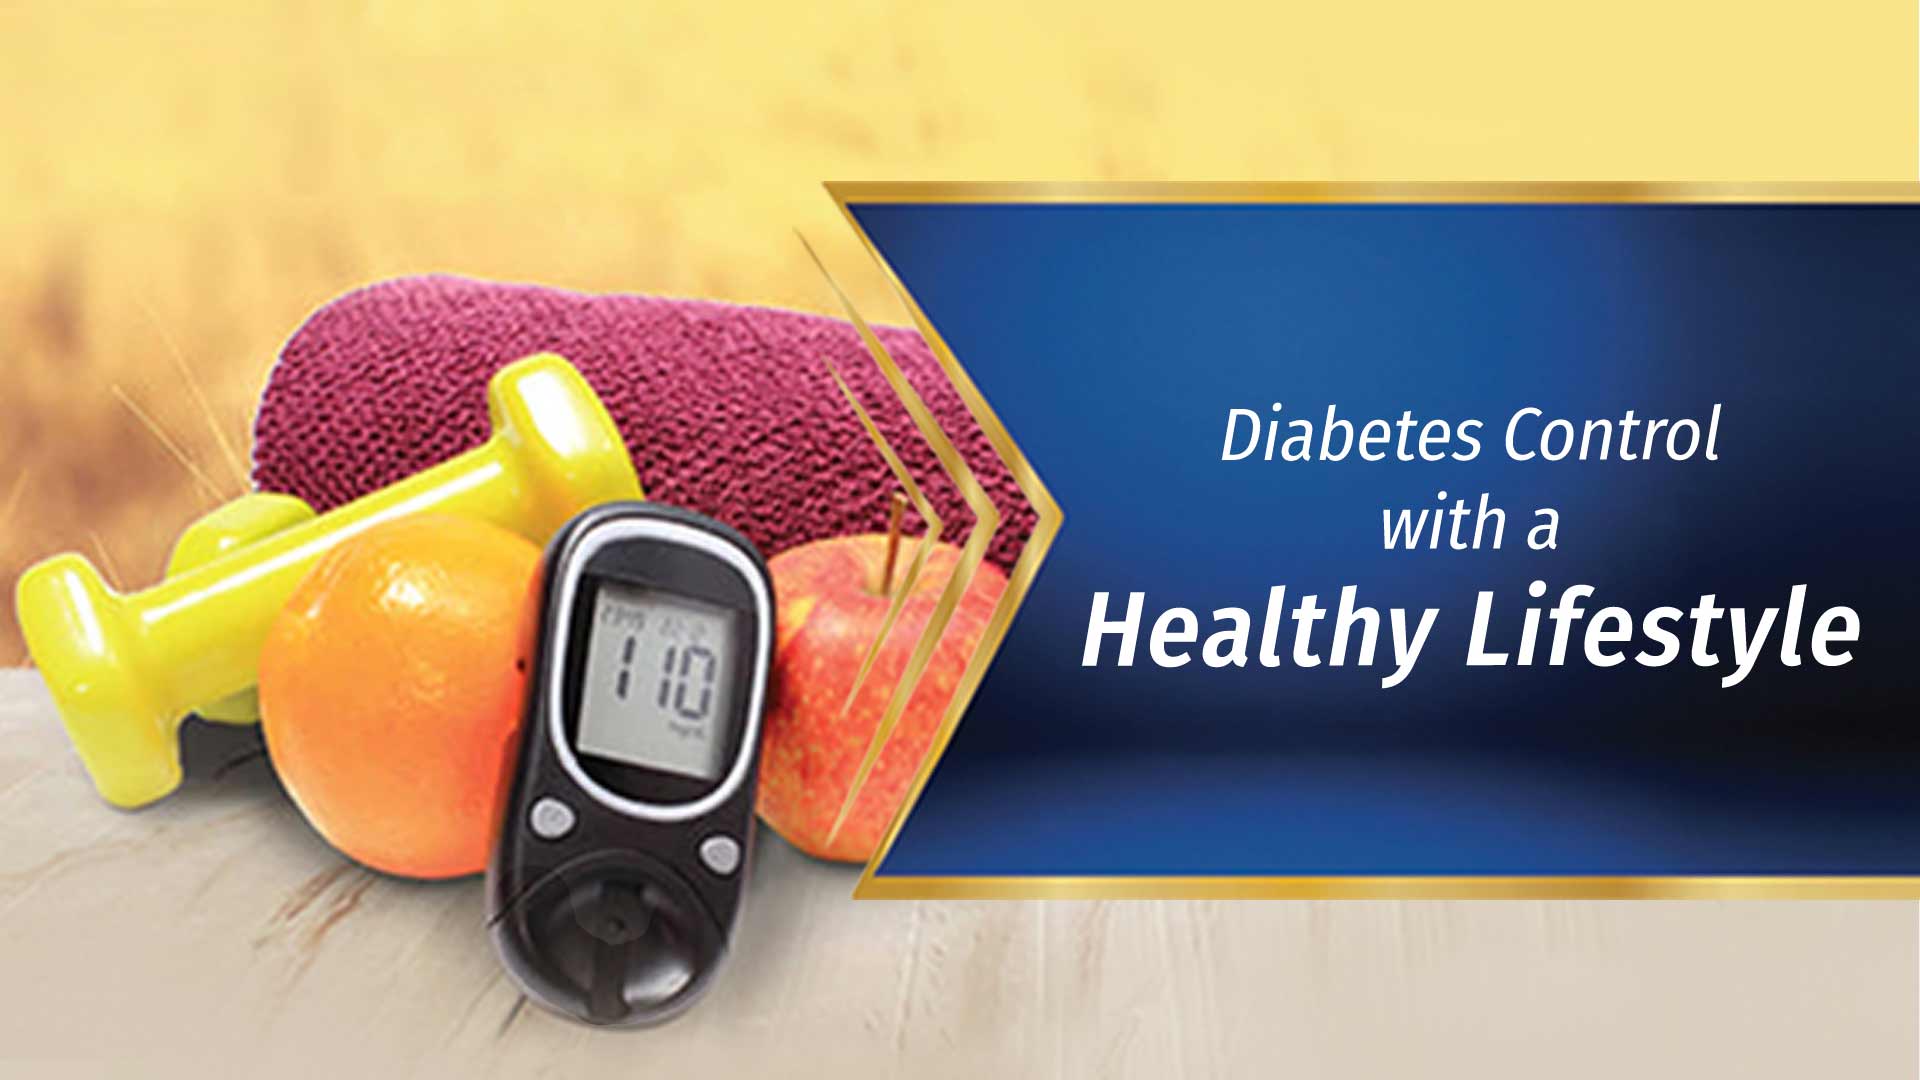 Diabetes Control with a Healthy Lifestyle